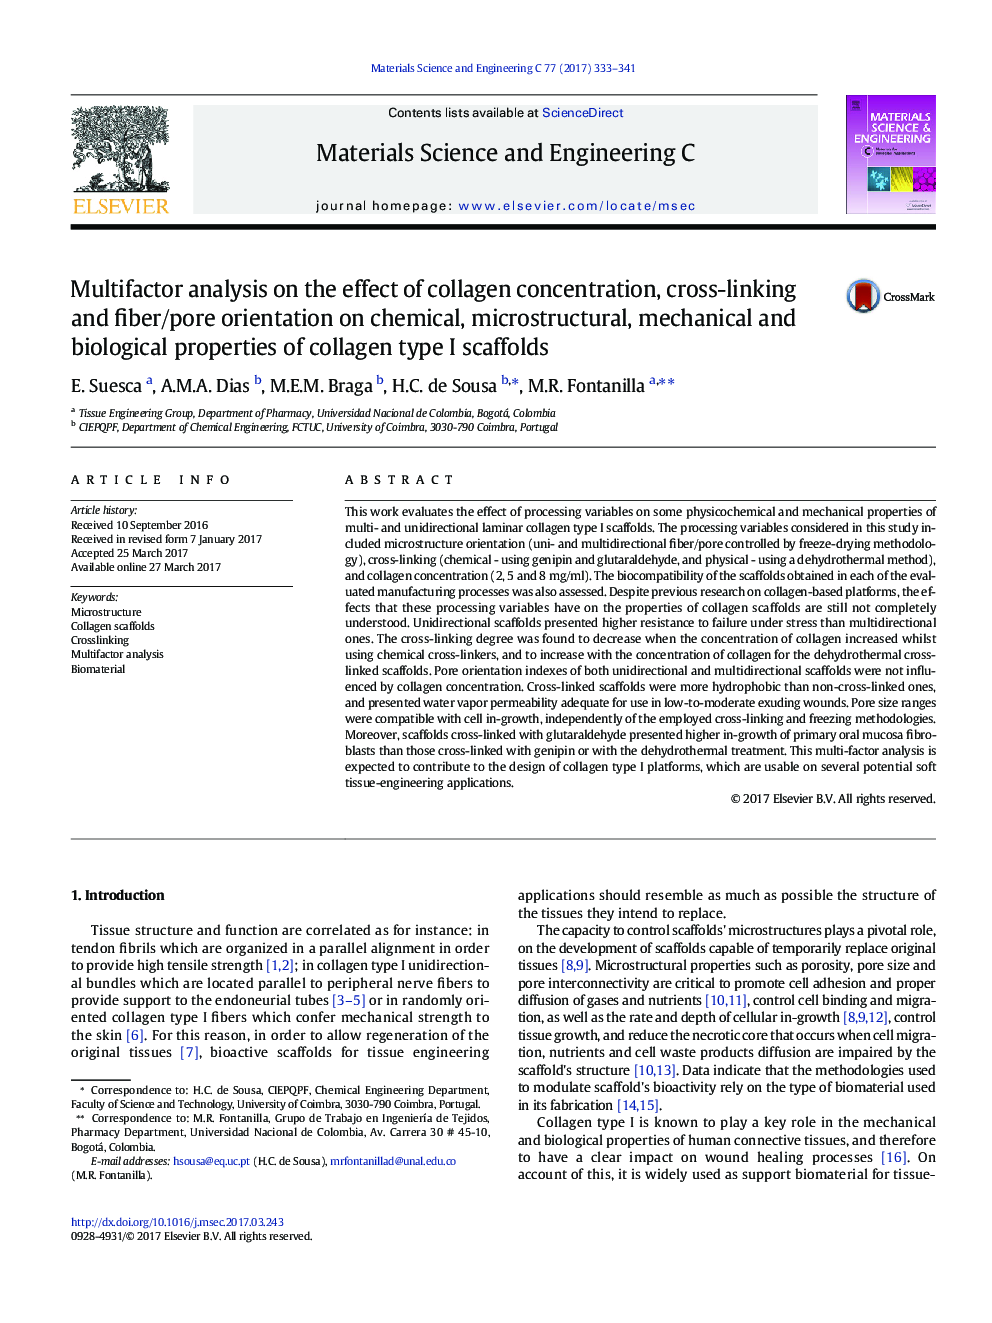 Multifactor analysis on the effect of collagen concentration, cross-linking and fiber/pore orientation on chemical, microstructural, mechanical and biological properties of collagen type I scaffolds